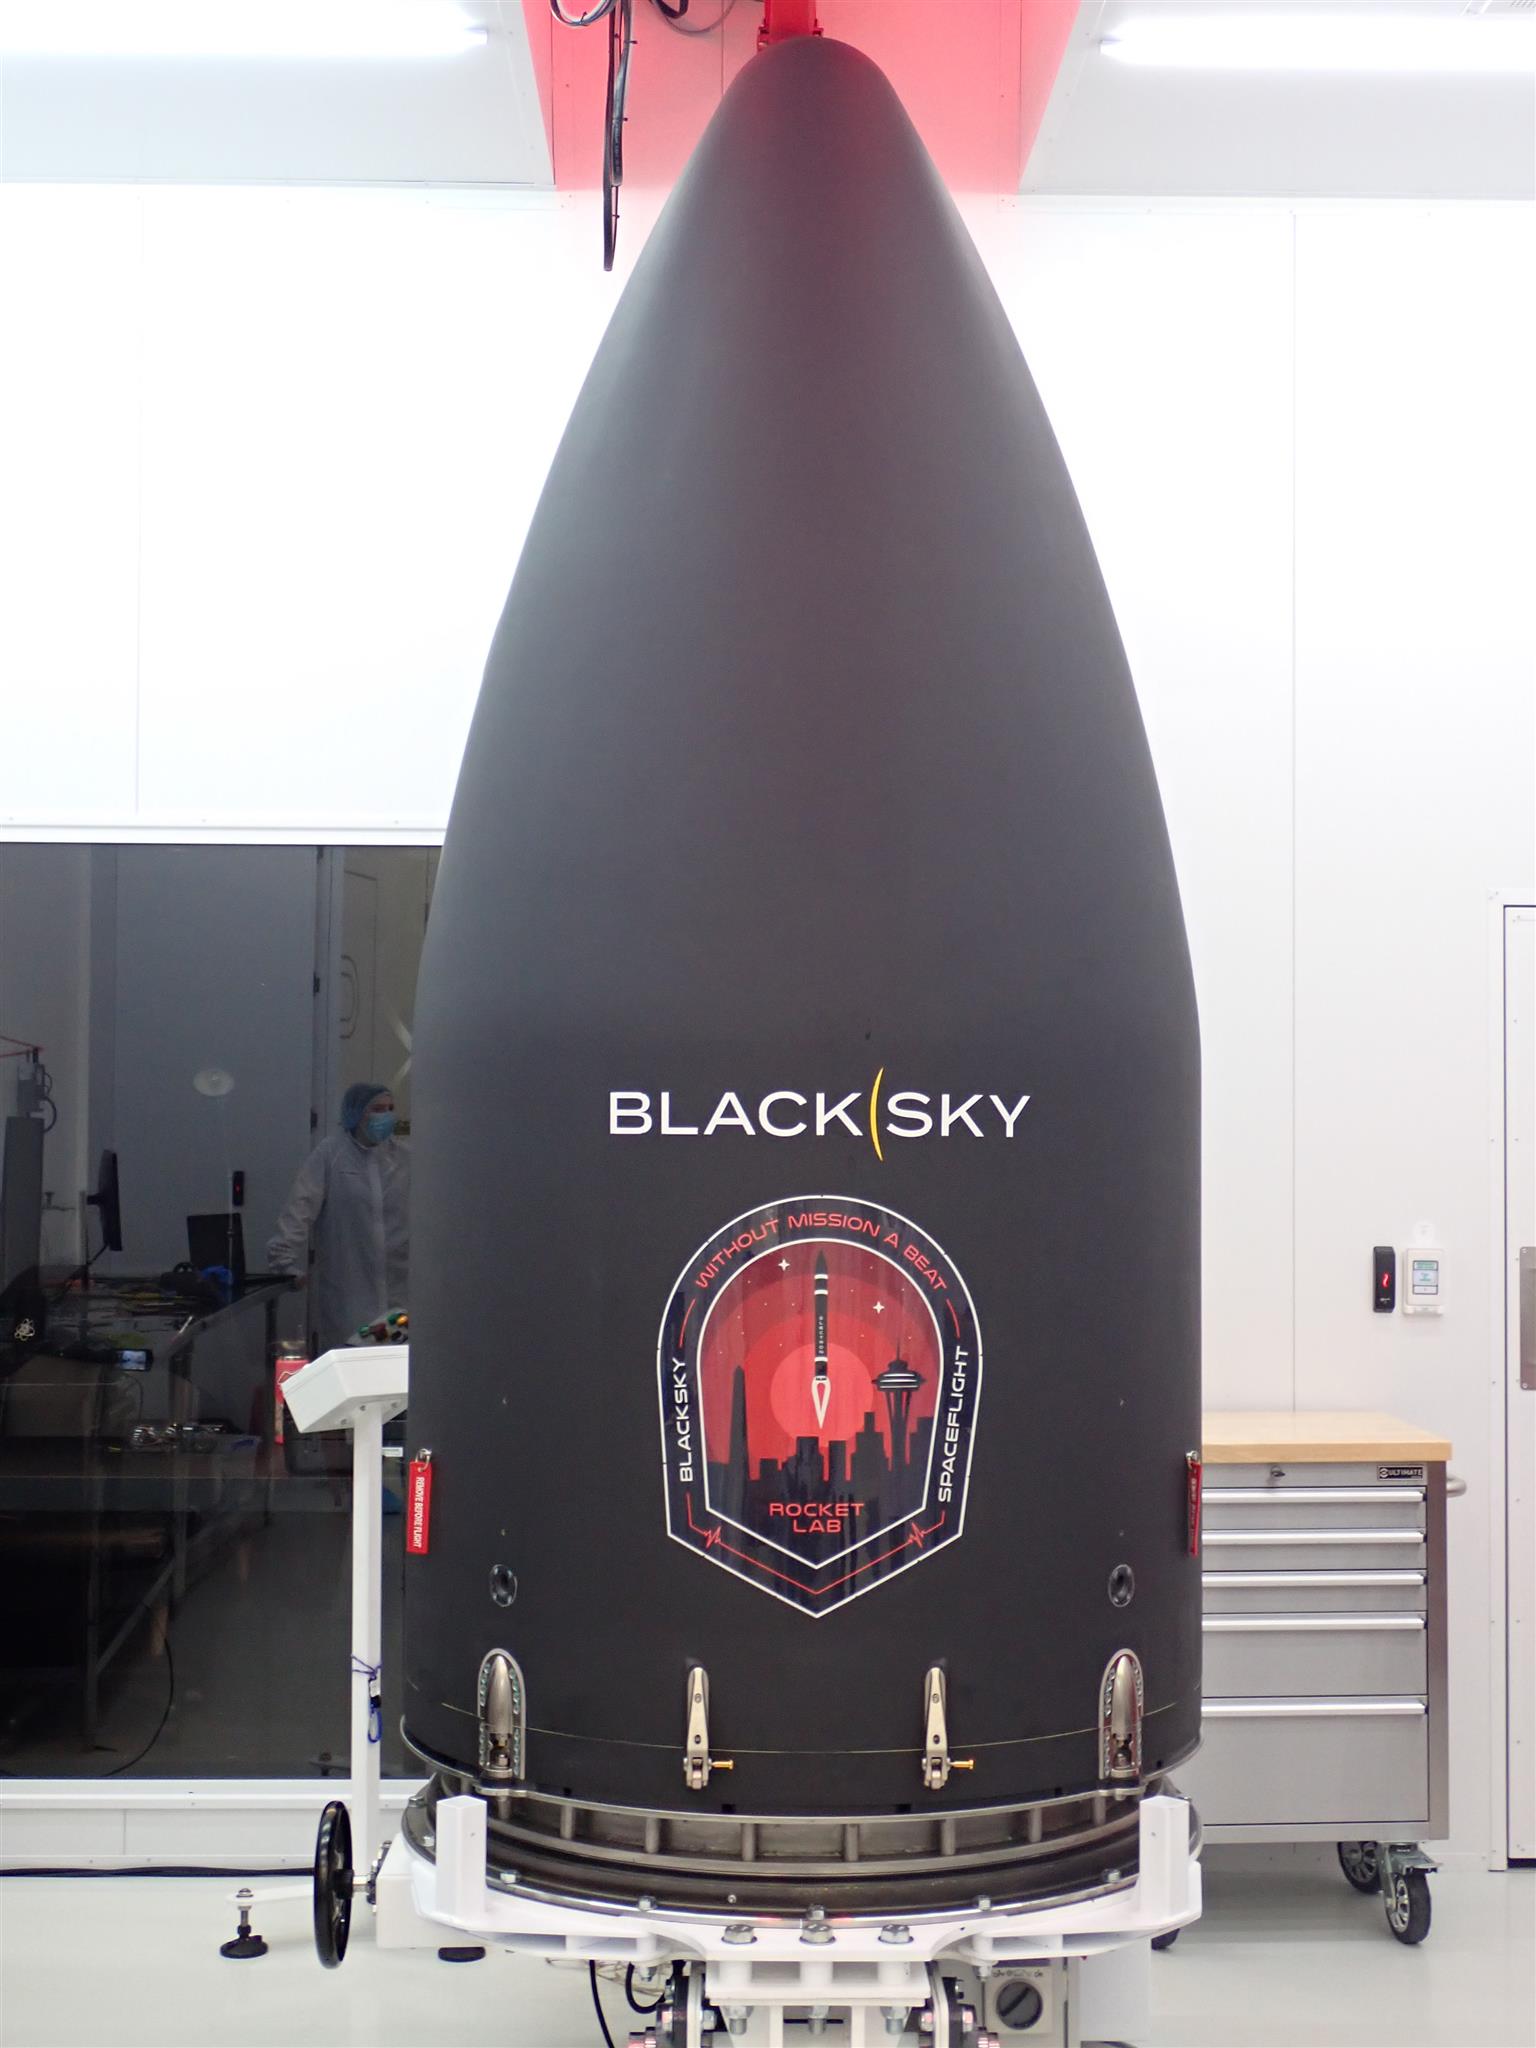 Rocket Lab Confirms Next Electron Launch Window Opens for BlackSky April 1, 2022 UTC; Provides Update on Effect to Prior Q1 Revenue Guidance